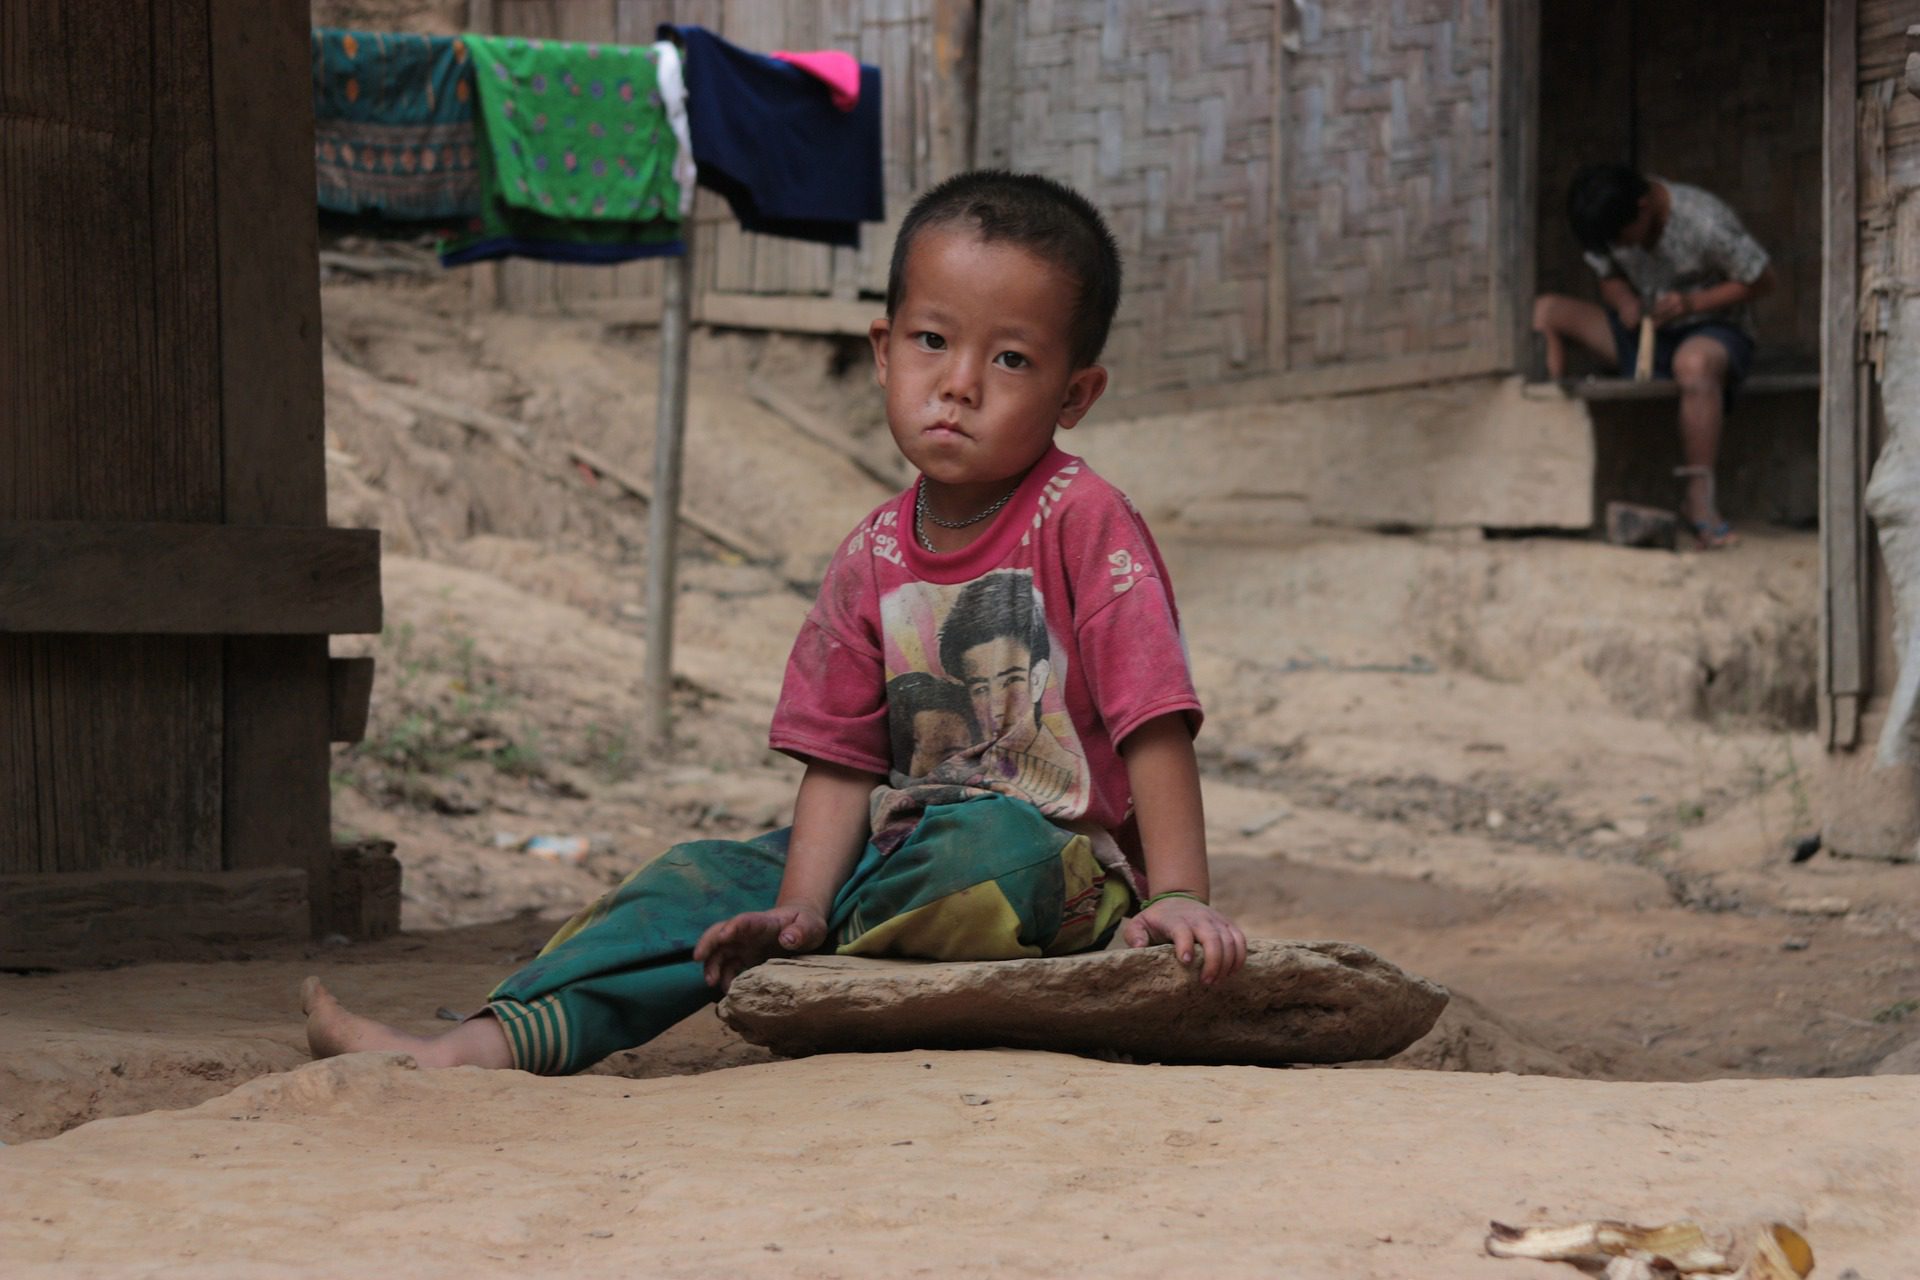 Young boy in poverty in developing region.